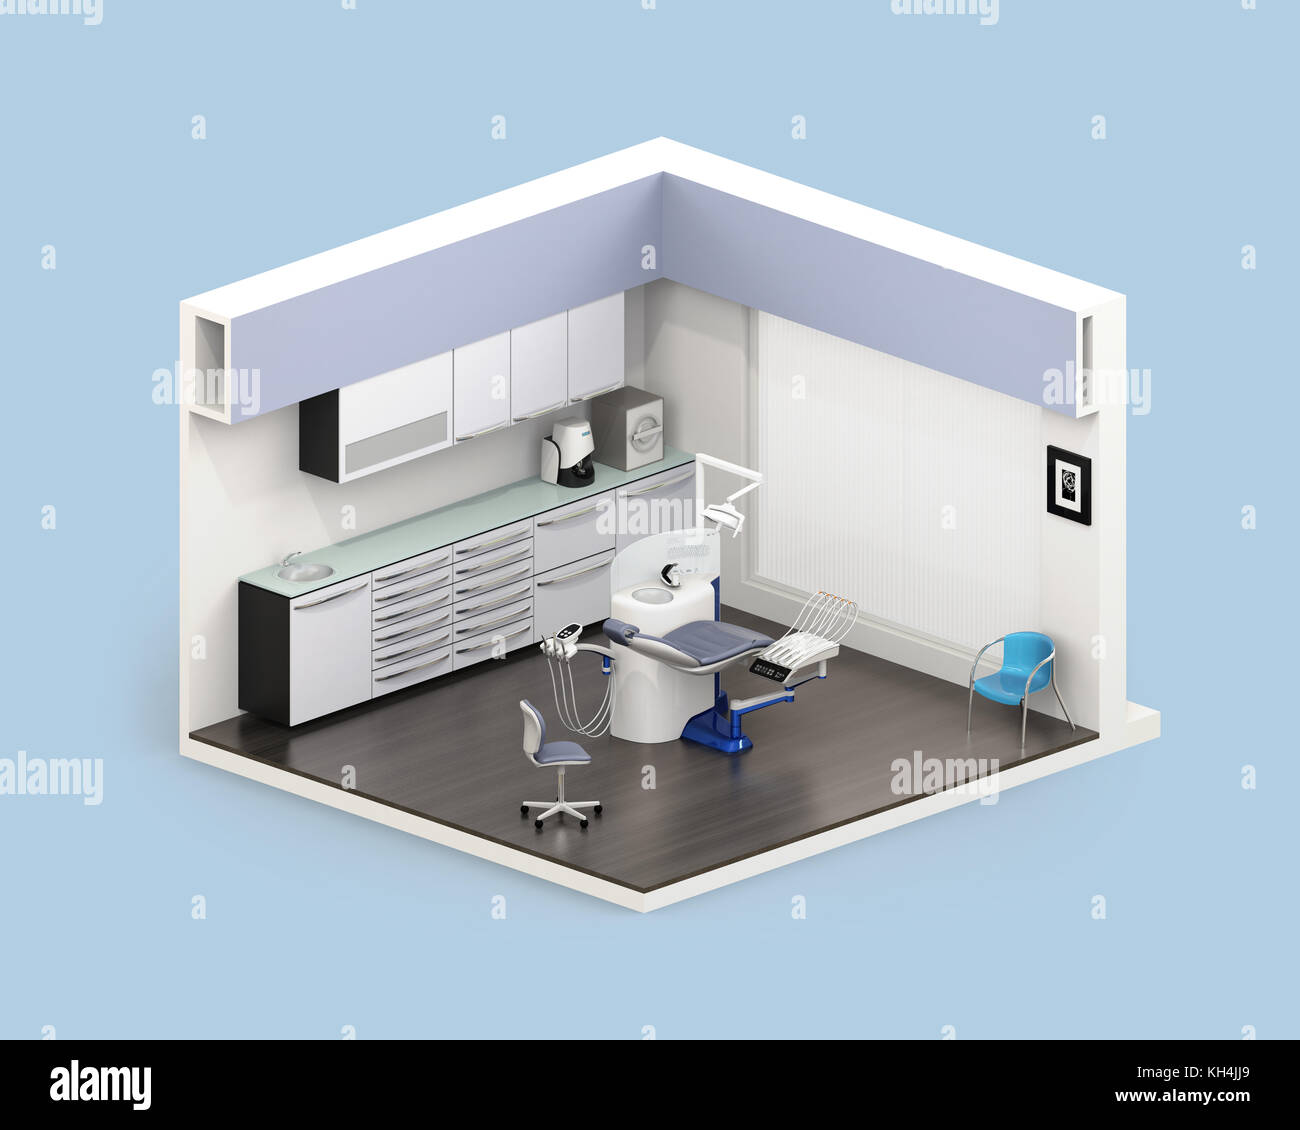 Isometric View Of Dental Clinic Interior With Dental Chair And